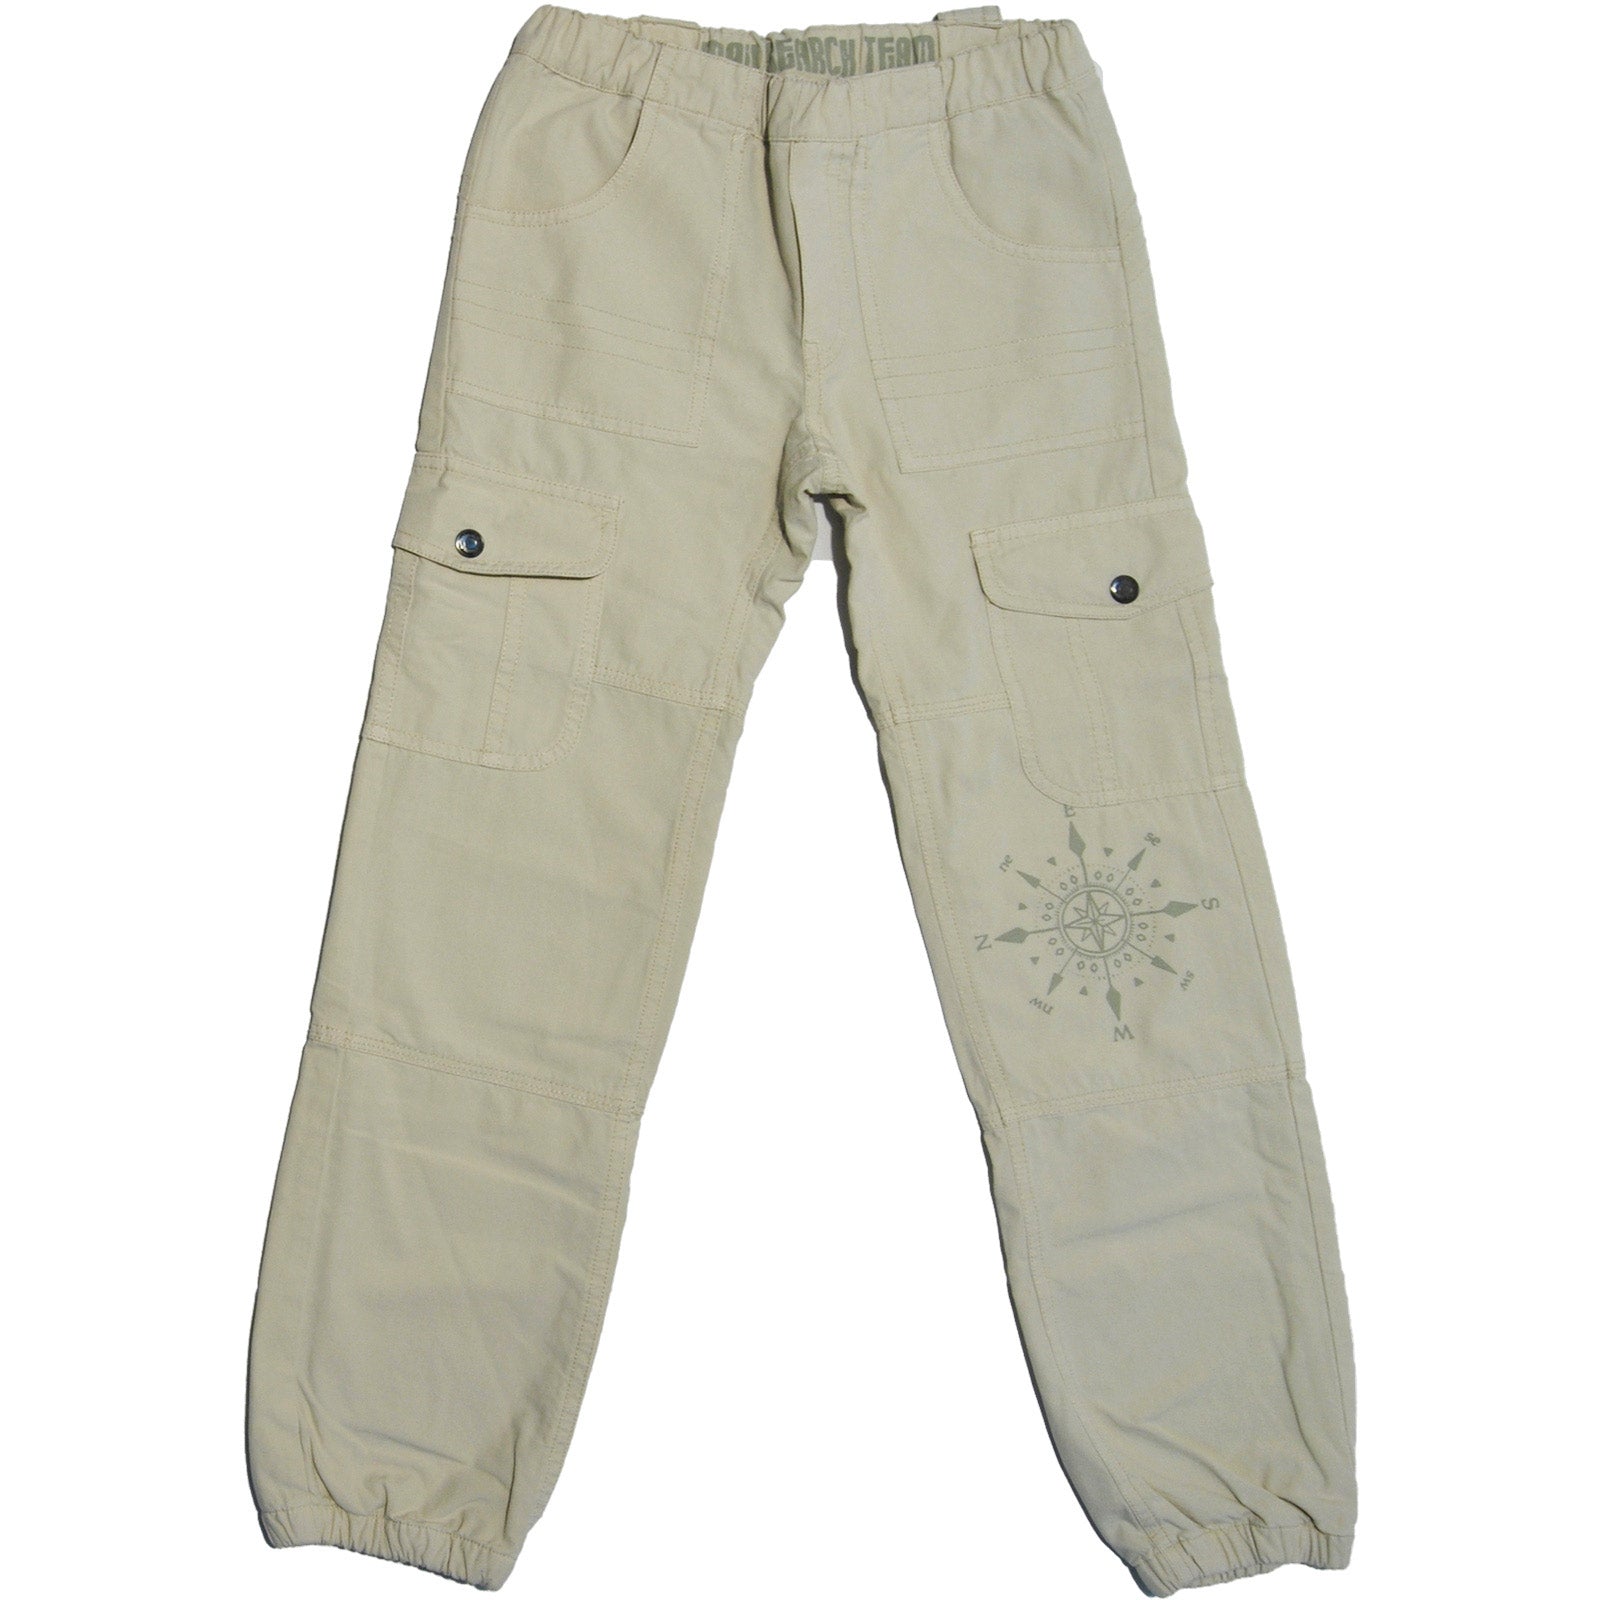 
  Trousers from the children's clothing line Mirtillo pouch trousers, front pockets and side poc...